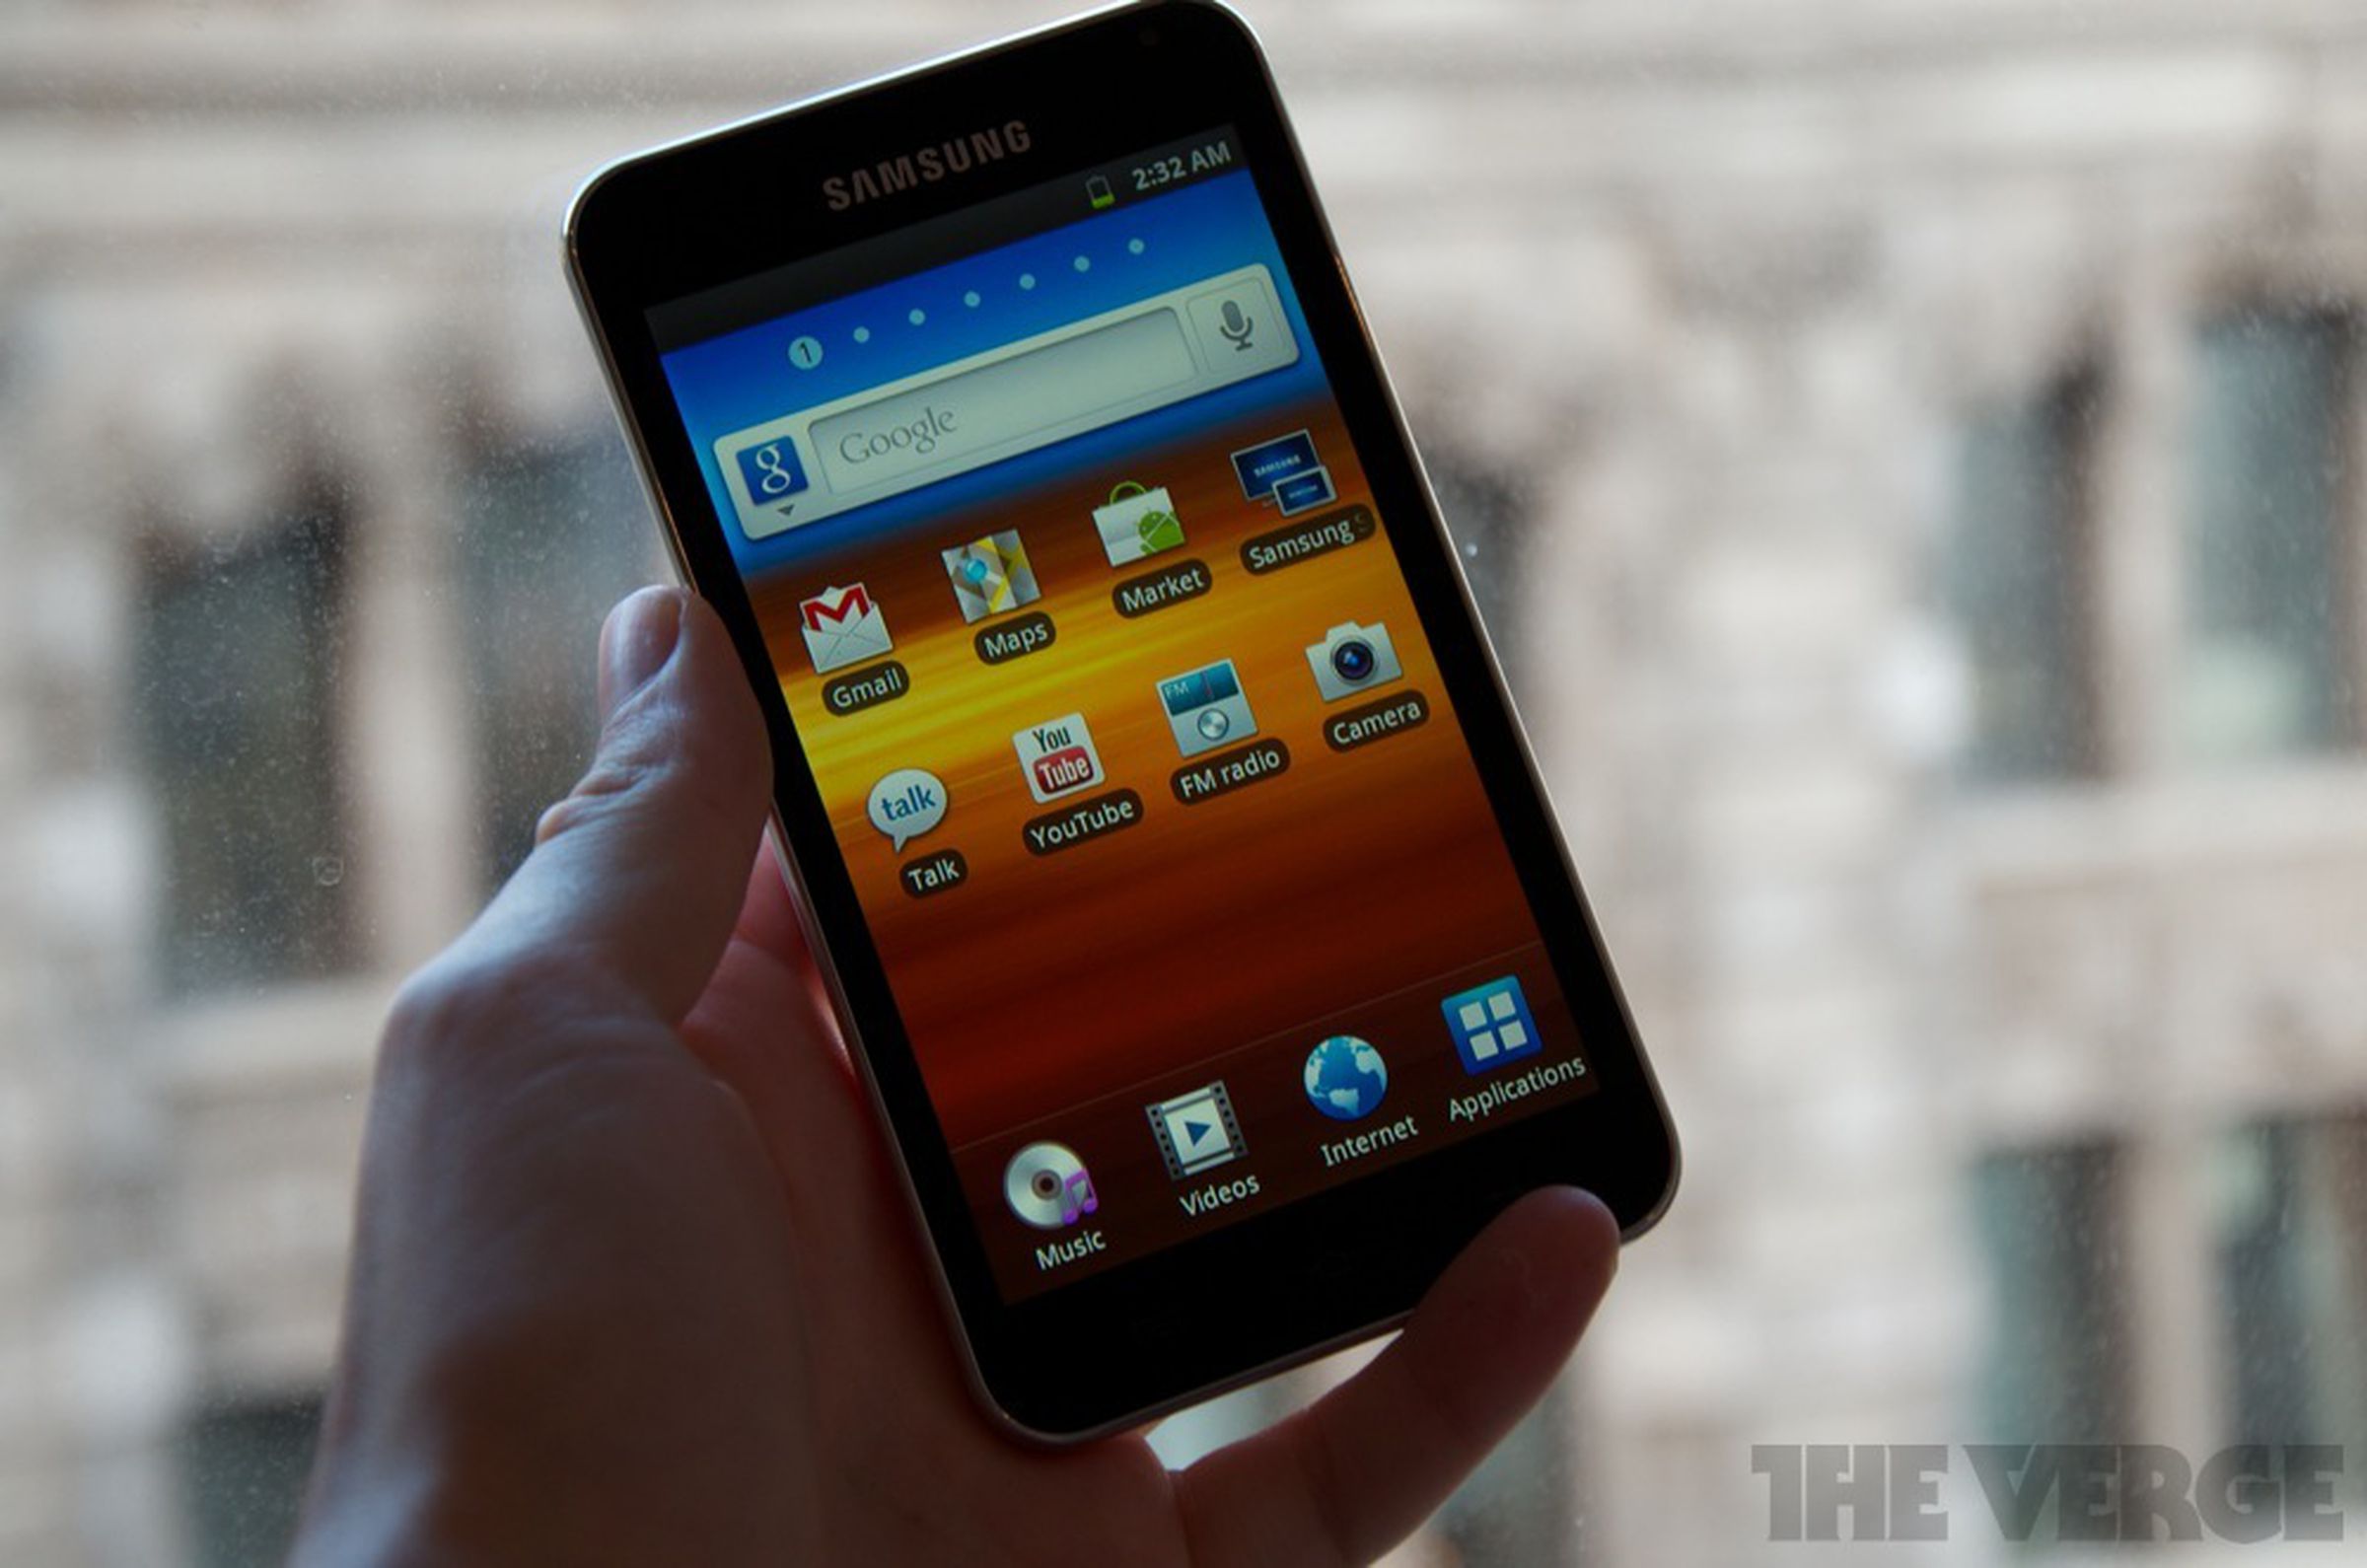 Samsung Galaxy Player 4.0 and 5.0 review photos